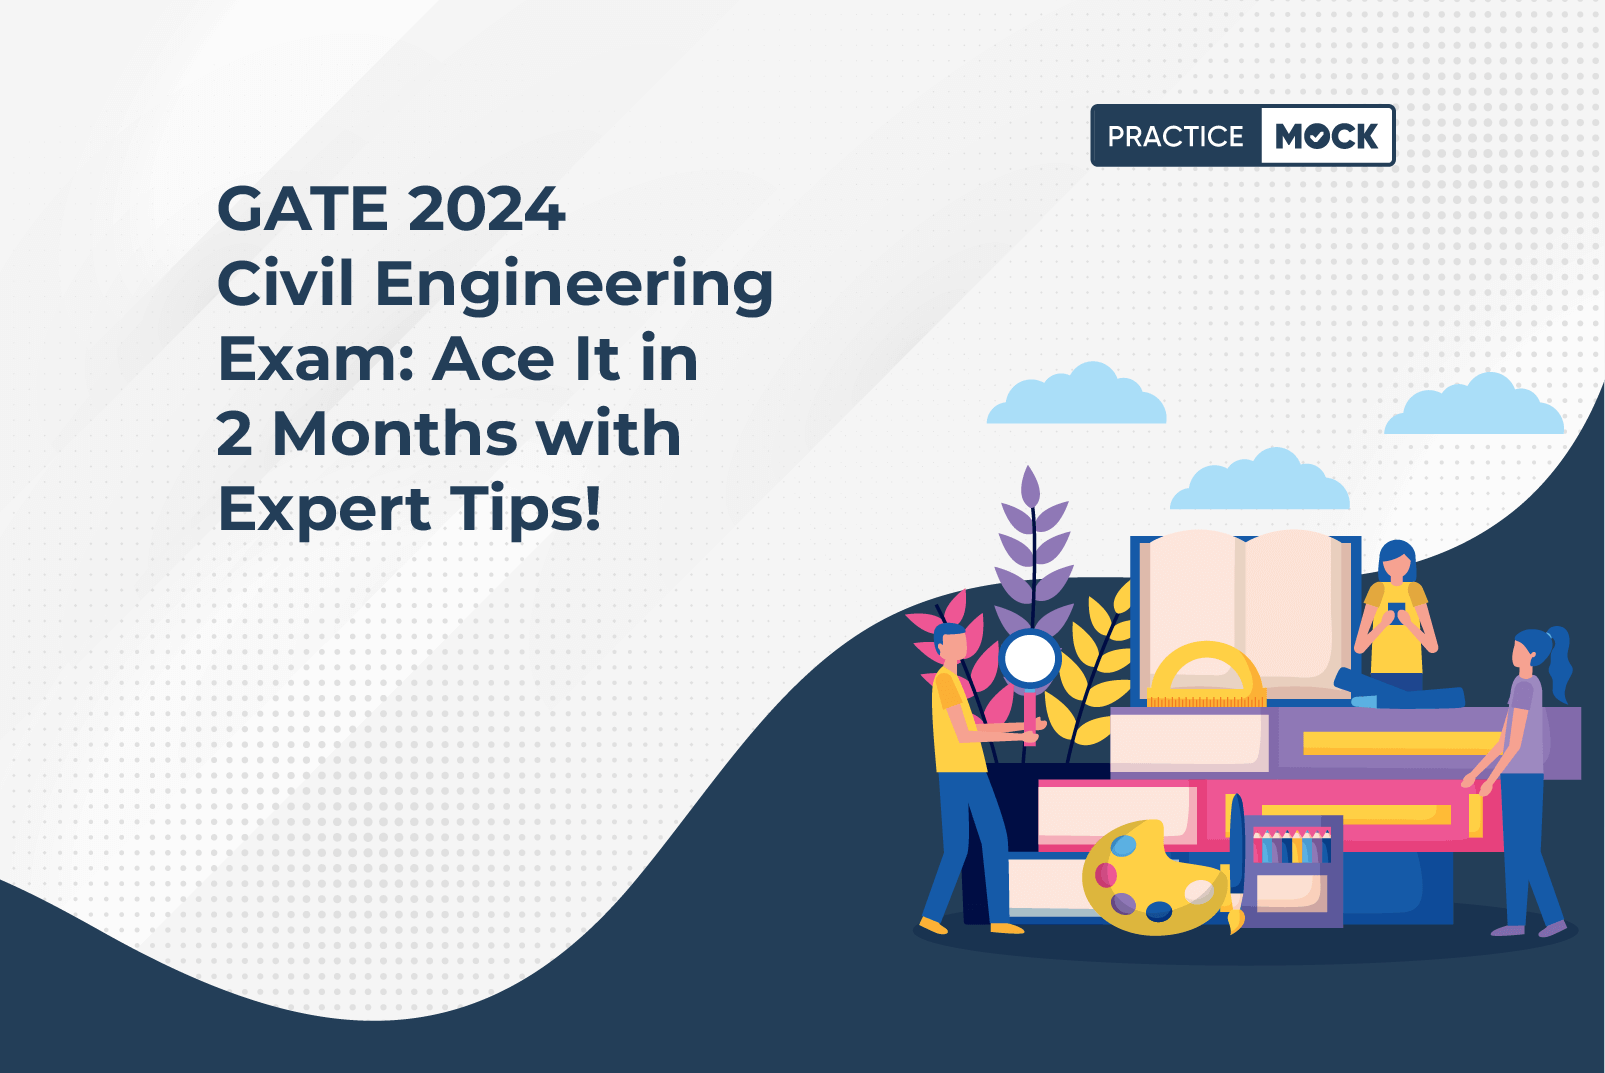 GATE 2024 Civil Engineering Exam: Ace It in 2 Months with Expert Tips!